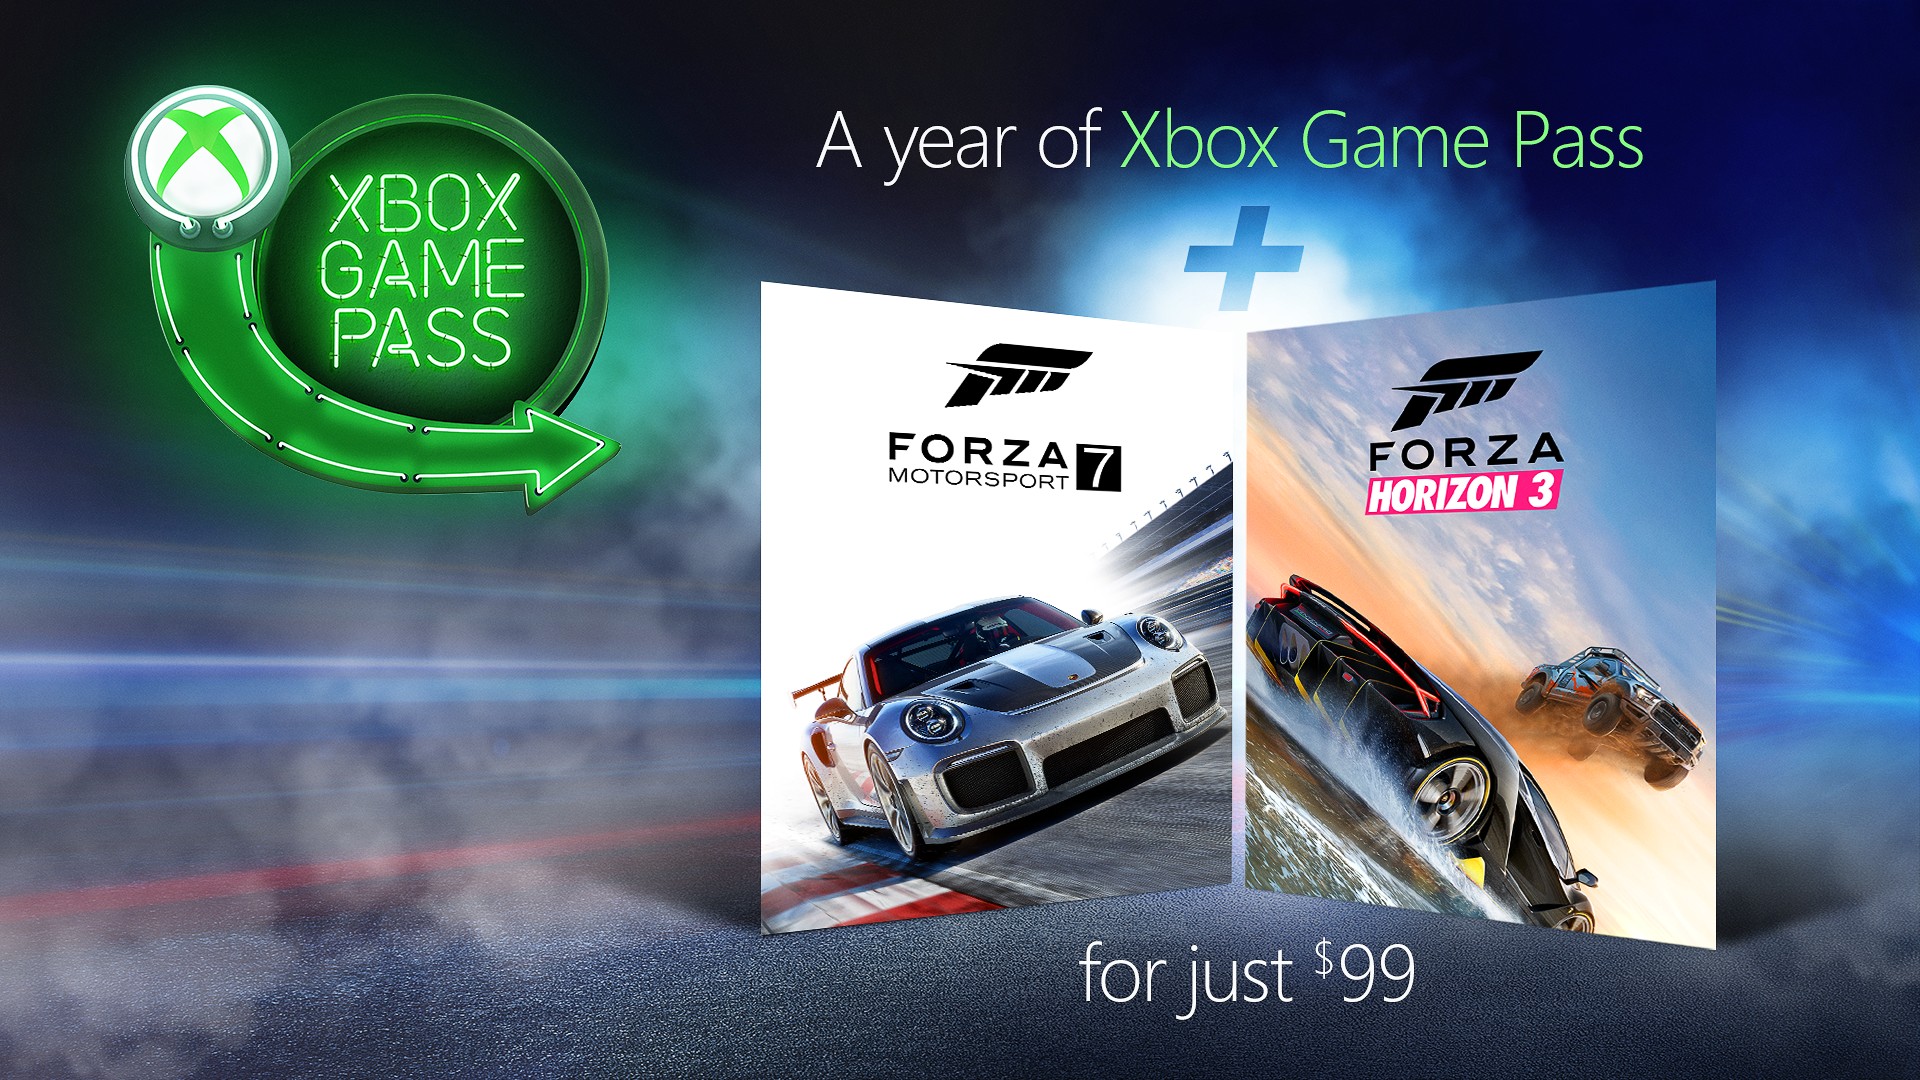 Forza Horizon 5 Available Now with Xbox Game Pass - Xbox Wire